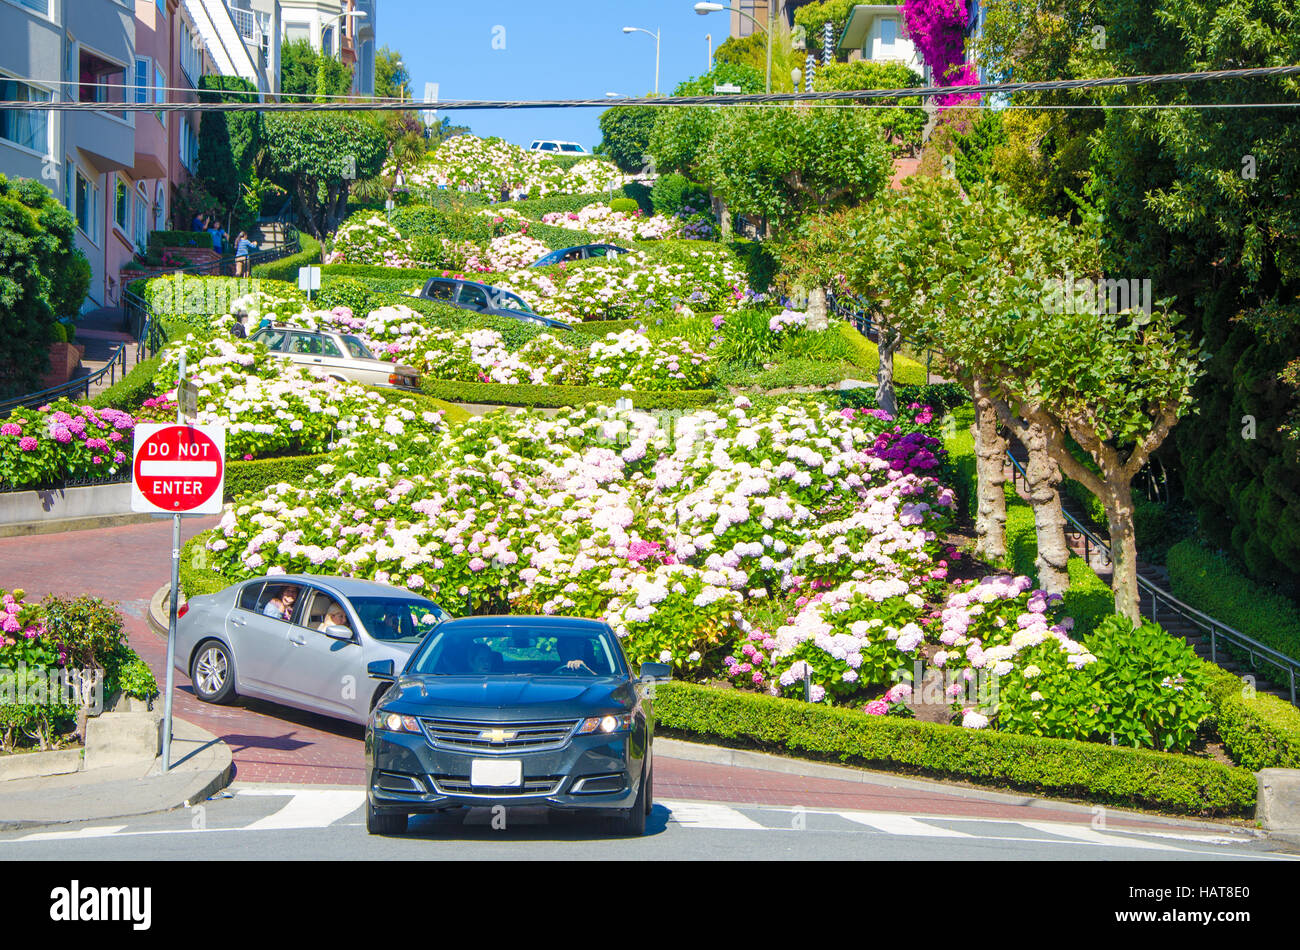 San Francisco, CA, USA - June 24, 2015: Lombard Street is an east-west street in San Francisco, California. The street is known as the most crooked st Stock Photo